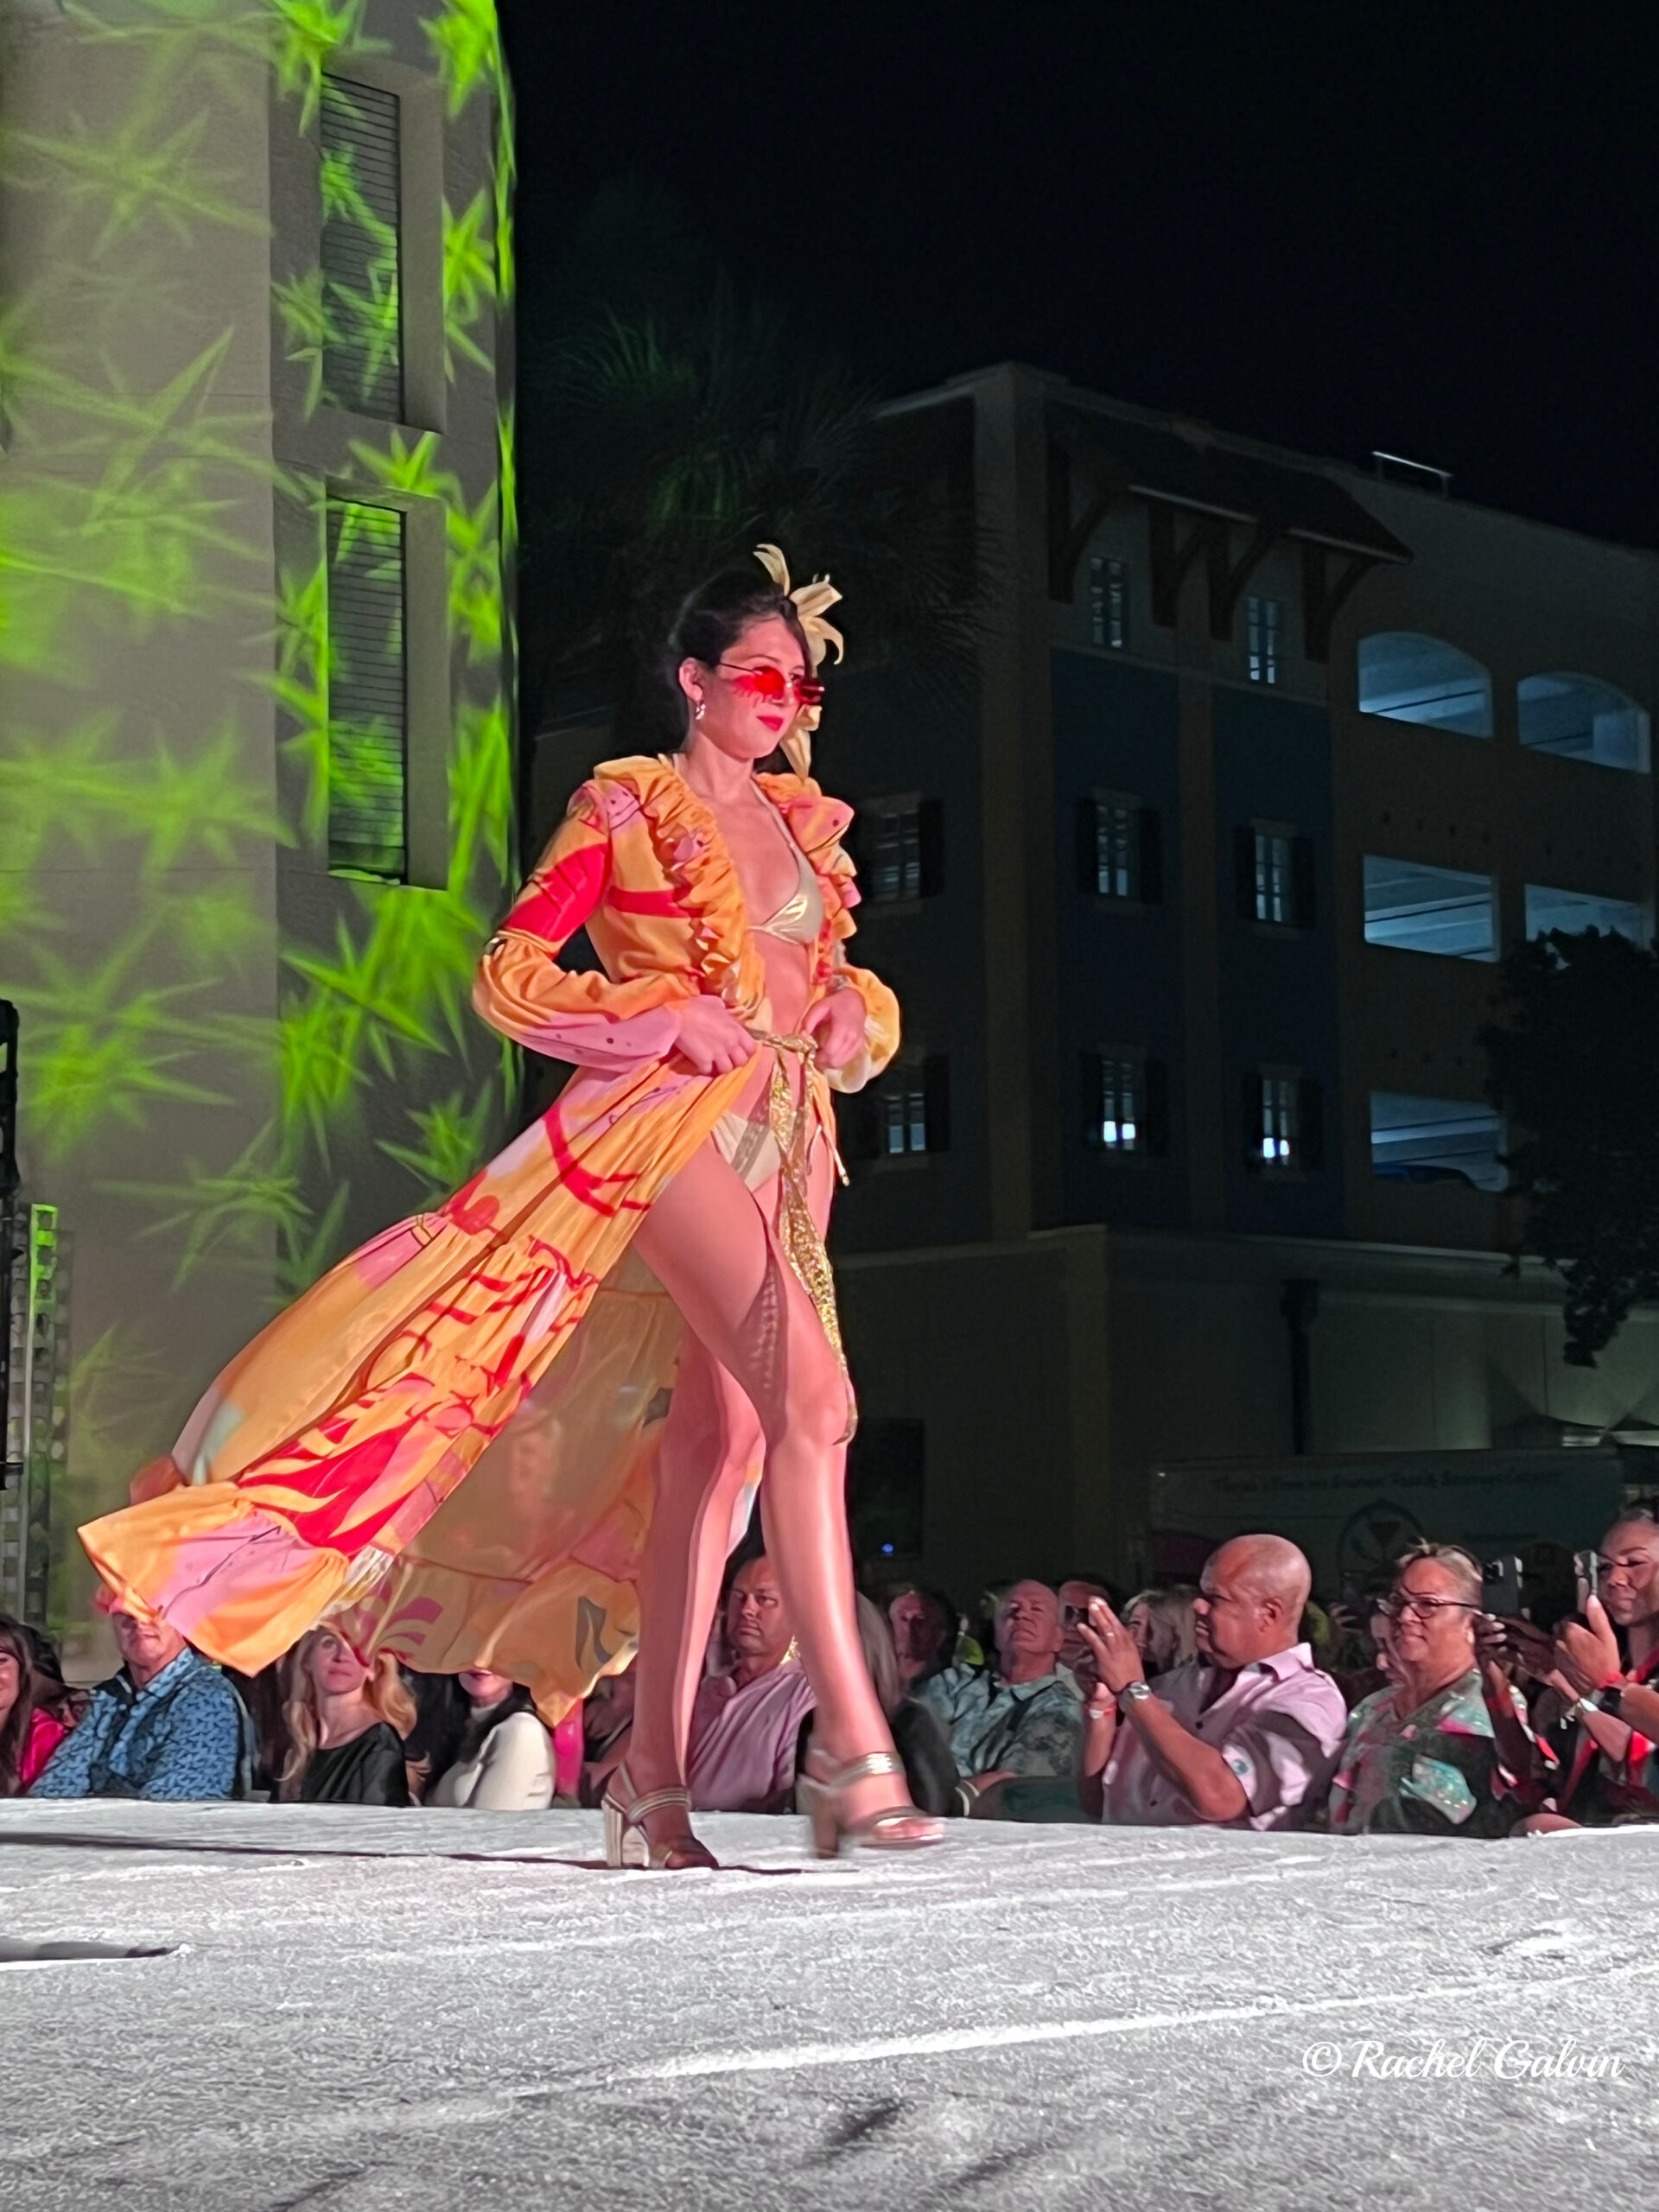 Bikinis to Ball Gowns, #LoveDelray hits the runway